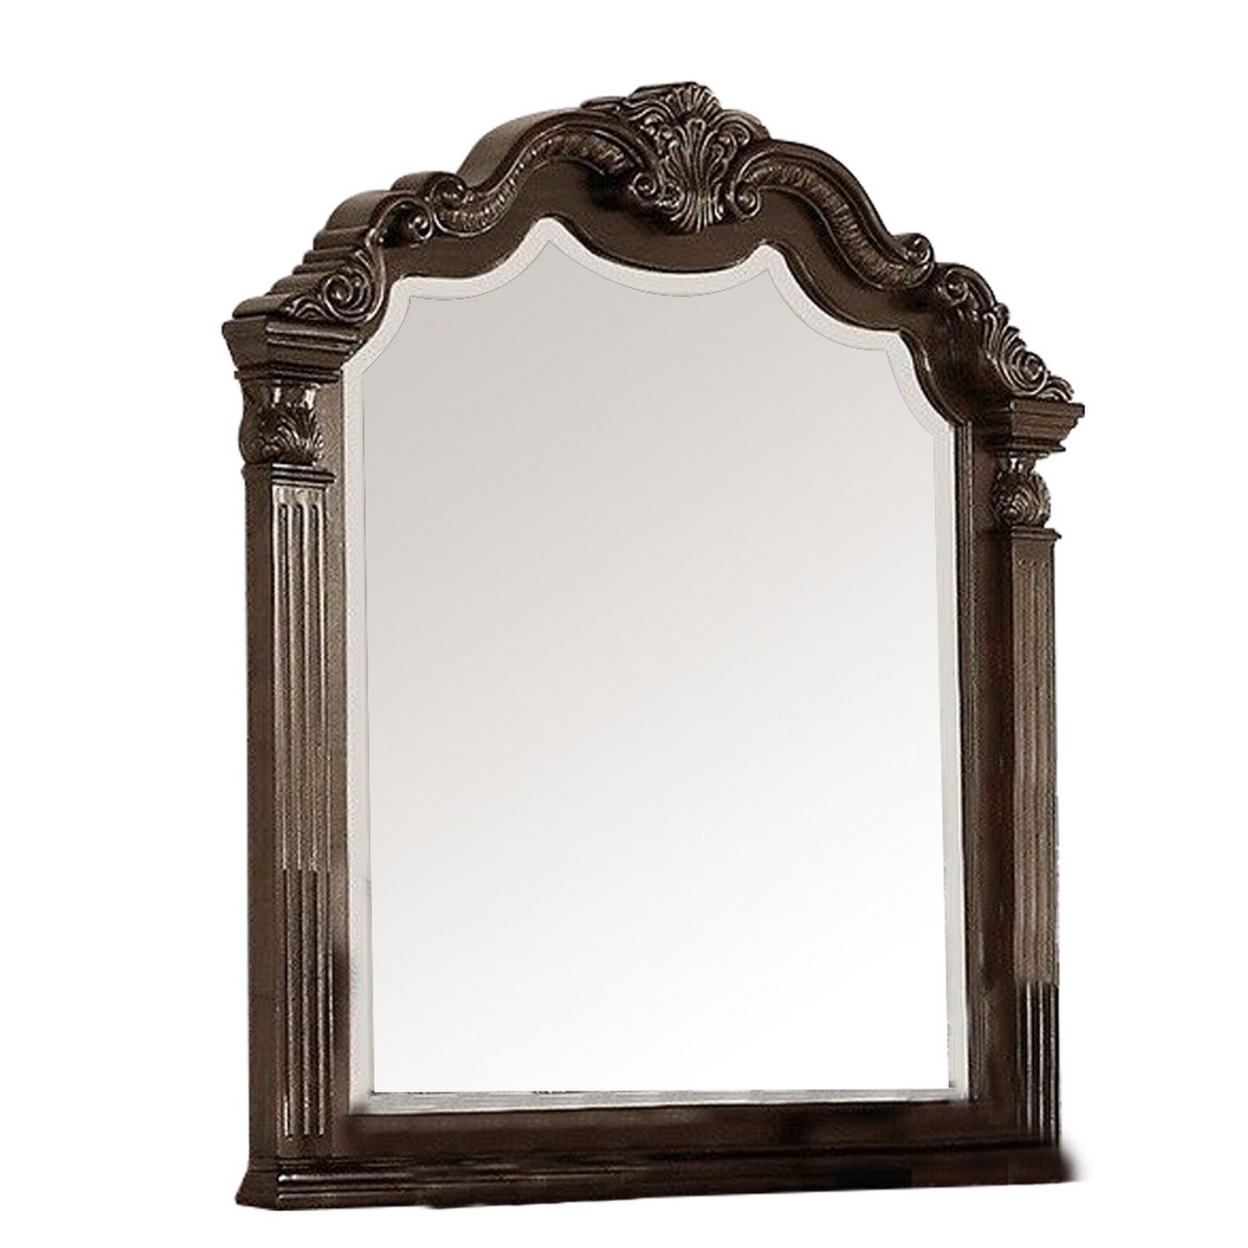 Modern Mirror With Crown Top Frame And Molded Details, Brown- Saltoro Sherpi